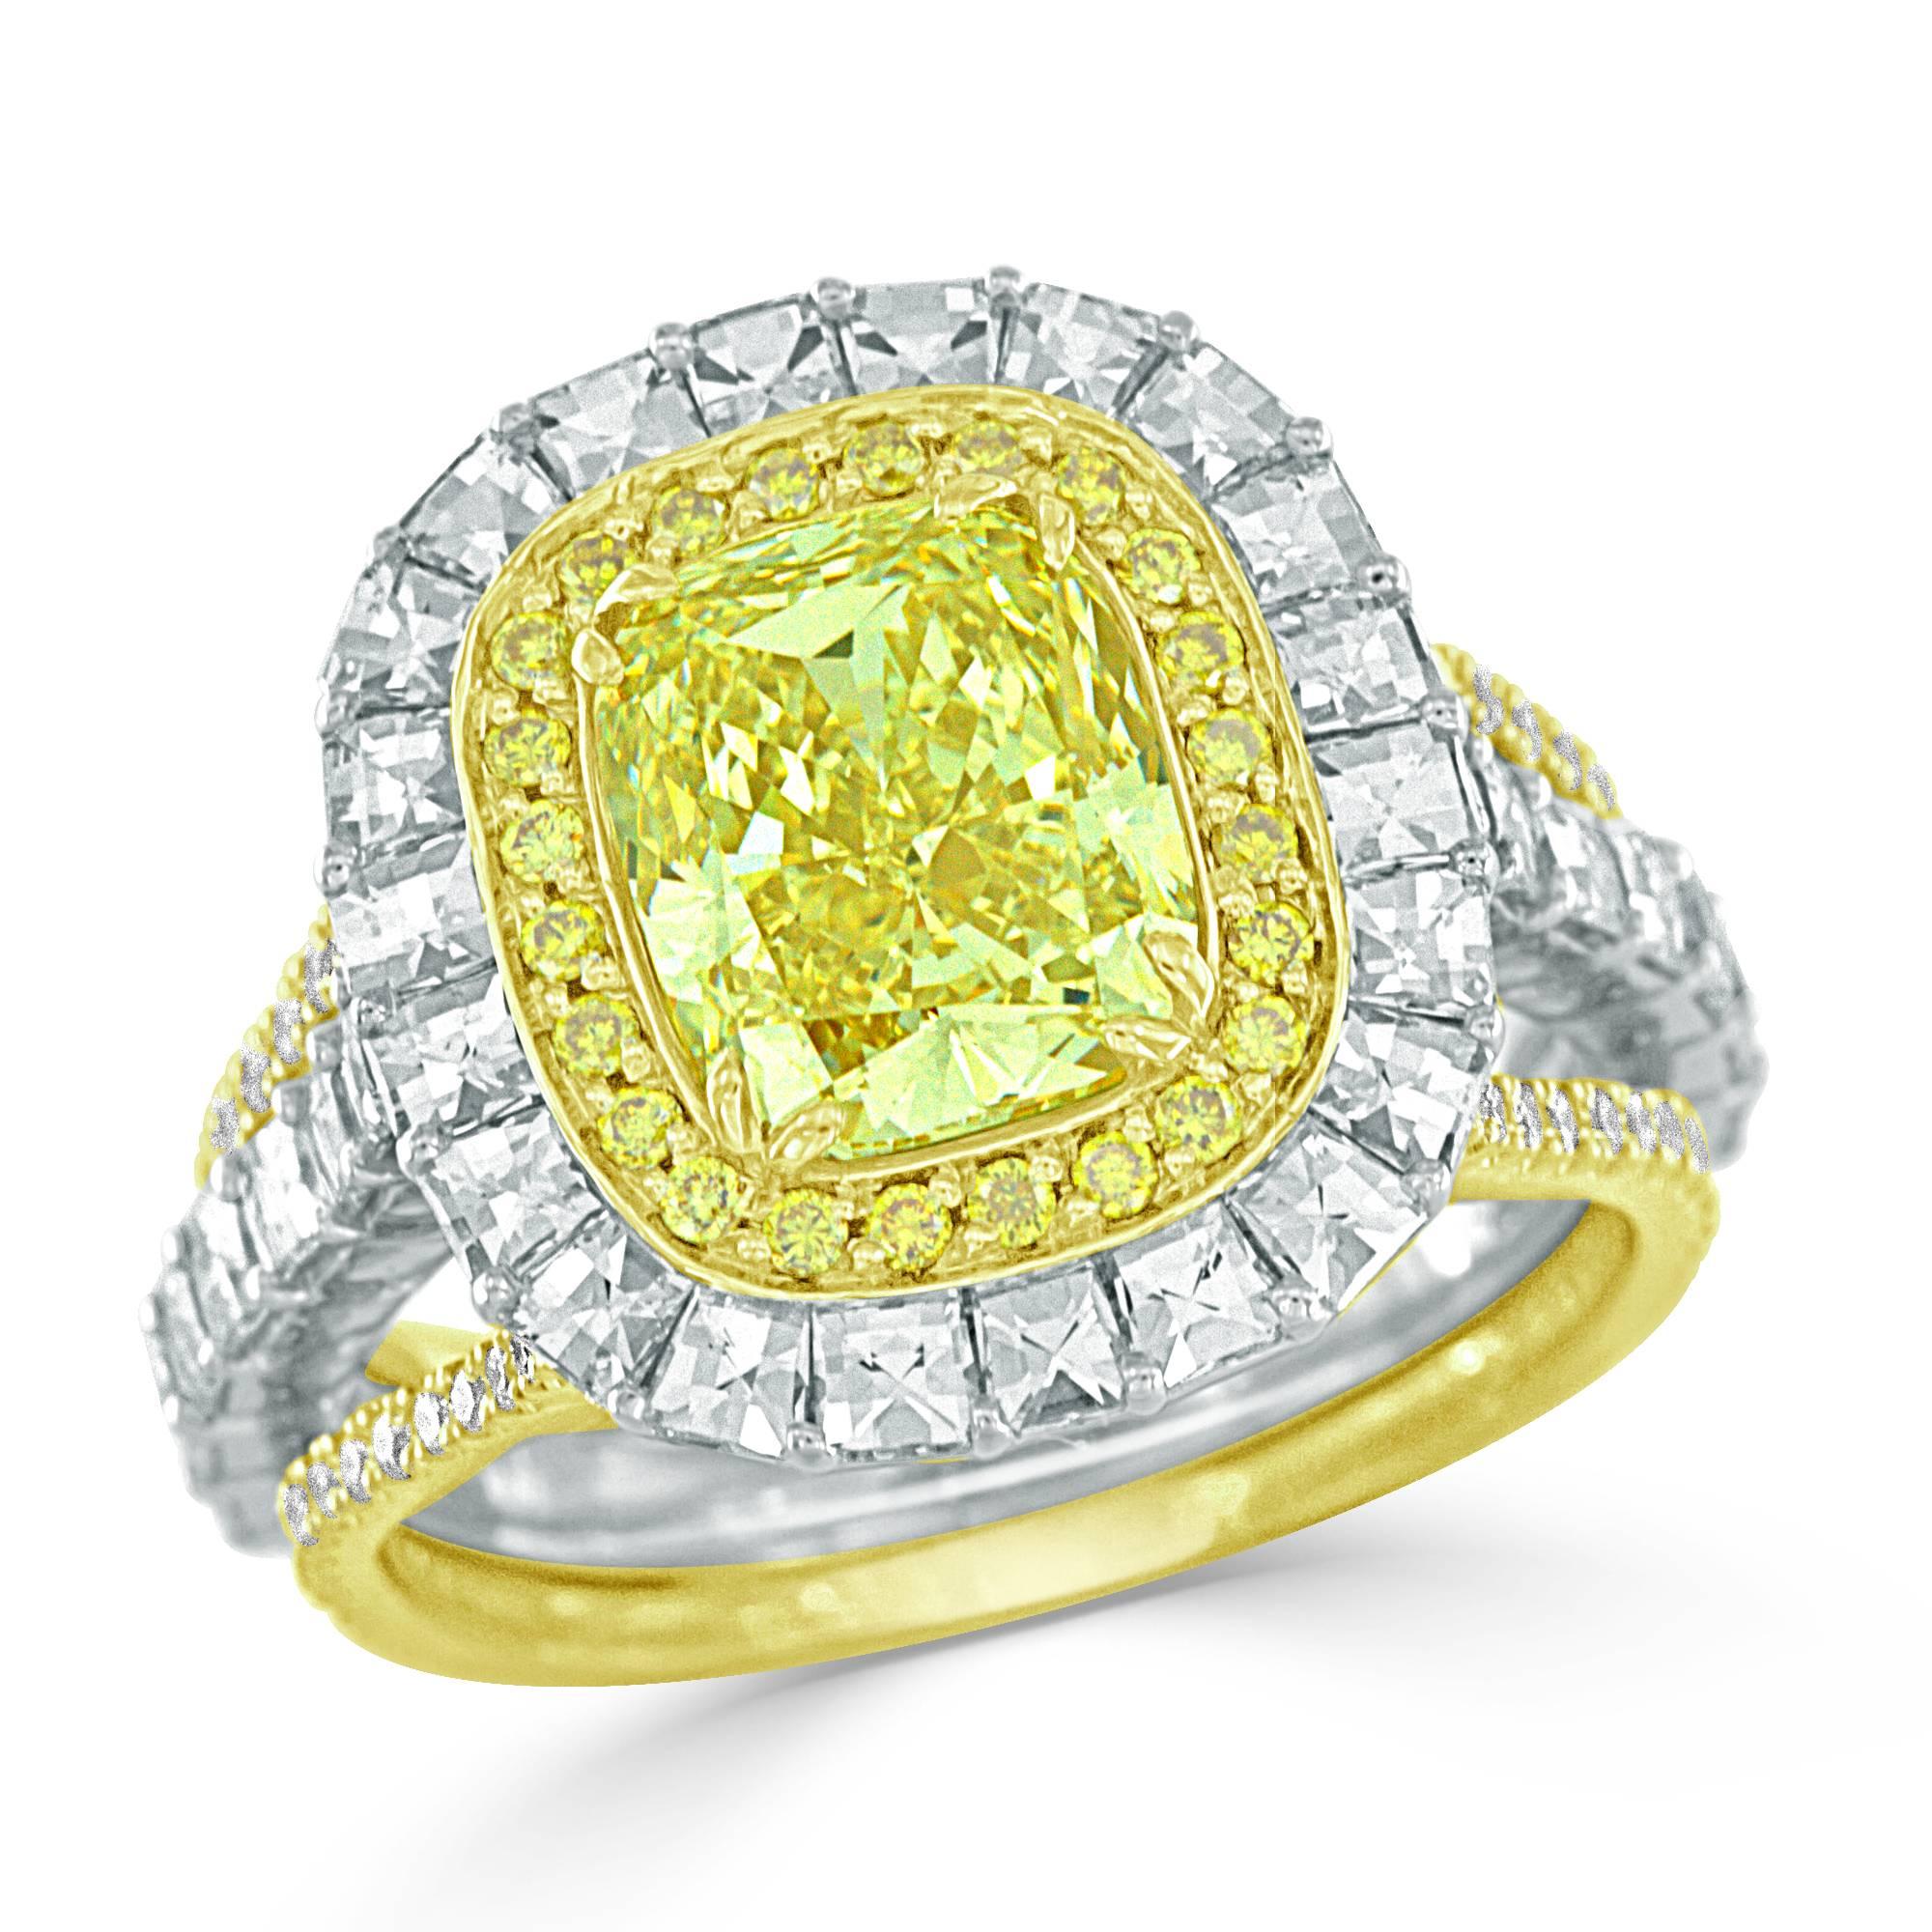 This breathtaking Bez Ambar designer fancy intense yellow diamond ring has a very captivating look. Featuring a GIA certified 2.40 carat fancy intense yellow cushion cut diamond, with a halo of round brilliant cut fancy yellow diamonds. These superb